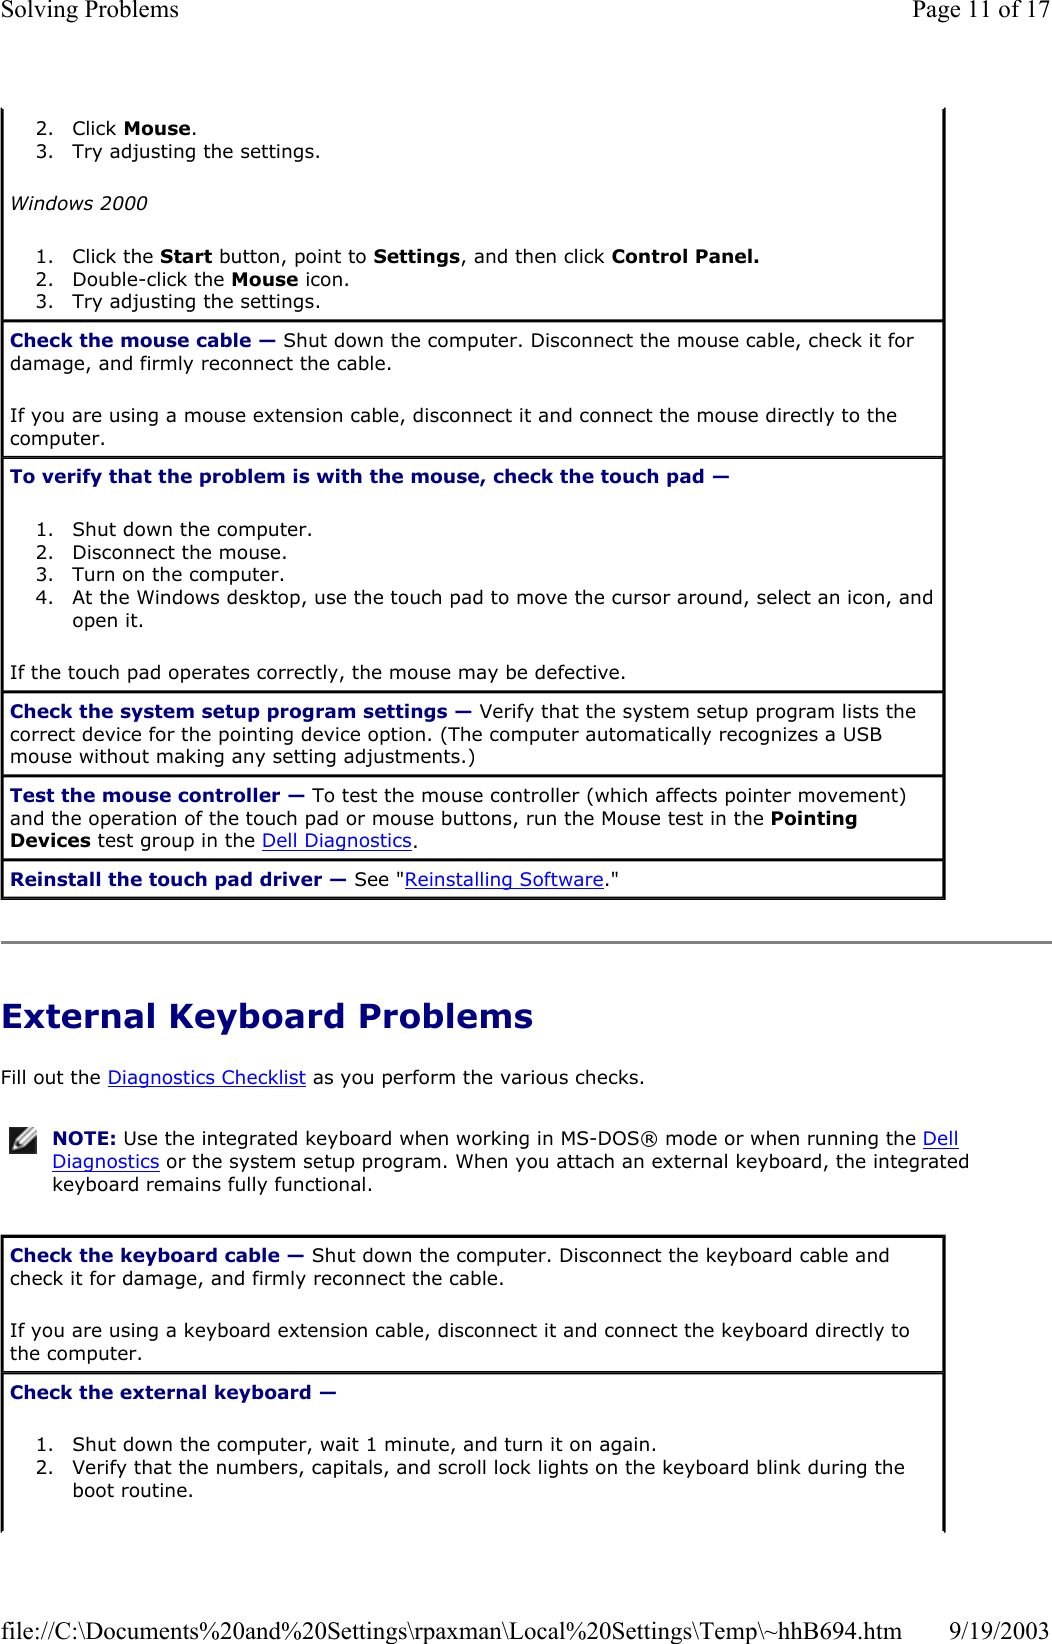 External Keyboard Problems Fill out the Diagnostics Checklist as you perform the various checks. 2. Click Mouse.  3. Try adjusting the settings.  Windows 2000 1. Click the Start button, point to Settings, and then click Control Panel.  2. Double-click the Mouse icon.  3. Try adjusting the settings.  Check the mouse cable — Shut down the computer. Disconnect the mouse cable, check it for damage, and firmly reconnect the cable. If you are using a mouse extension cable, disconnect it and connect the mouse directly to the computer. To verify that the problem is with the mouse, check the touch pad —  1. Shut down the computer.  2. Disconnect the mouse.  3. Turn on the computer.  4. At the Windows desktop, use the touch pad to move the cursor around, select an icon, and open it.  If the touch pad operates correctly, the mouse may be defective. Check the system setup program settings — Verify that the system setup program lists the correct device for the pointing device option. (The computer automatically recognizes a USB mouse without making any setting adjustments.) Test the mouse controller — To test the mouse controller (which affects pointer movement) and the operation of the touch pad or mouse buttons, run the Mouse test in the Pointing Devices test group in the Dell Diagnostics.  Reinstall the touch pad driver — See &quot;Reinstalling Software.&quot; NOTE: Use the integrated keyboard when working in MS-DOS® mode or when running the Dell Diagnostics or the system setup program. When you attach an external keyboard, the integrated keyboard remains fully functional.Check the keyboard cable — Shut down the computer. Disconnect the keyboard cable and check it for damage, and firmly reconnect the cable. If you are using a keyboard extension cable, disconnect it and connect the keyboard directly to the computer. Check the external keyboard —  1. Shut down the computer, wait 1 minute, and turn it on again.  2. Verify that the numbers, capitals, and scroll lock lights on the keyboard blink during the boot routine.  Page 11 of 17Solving Problems9/19/2003file://C:\Documents%20and%20Settings\rpaxman\Local%20Settings\Temp\~hhB694.htm